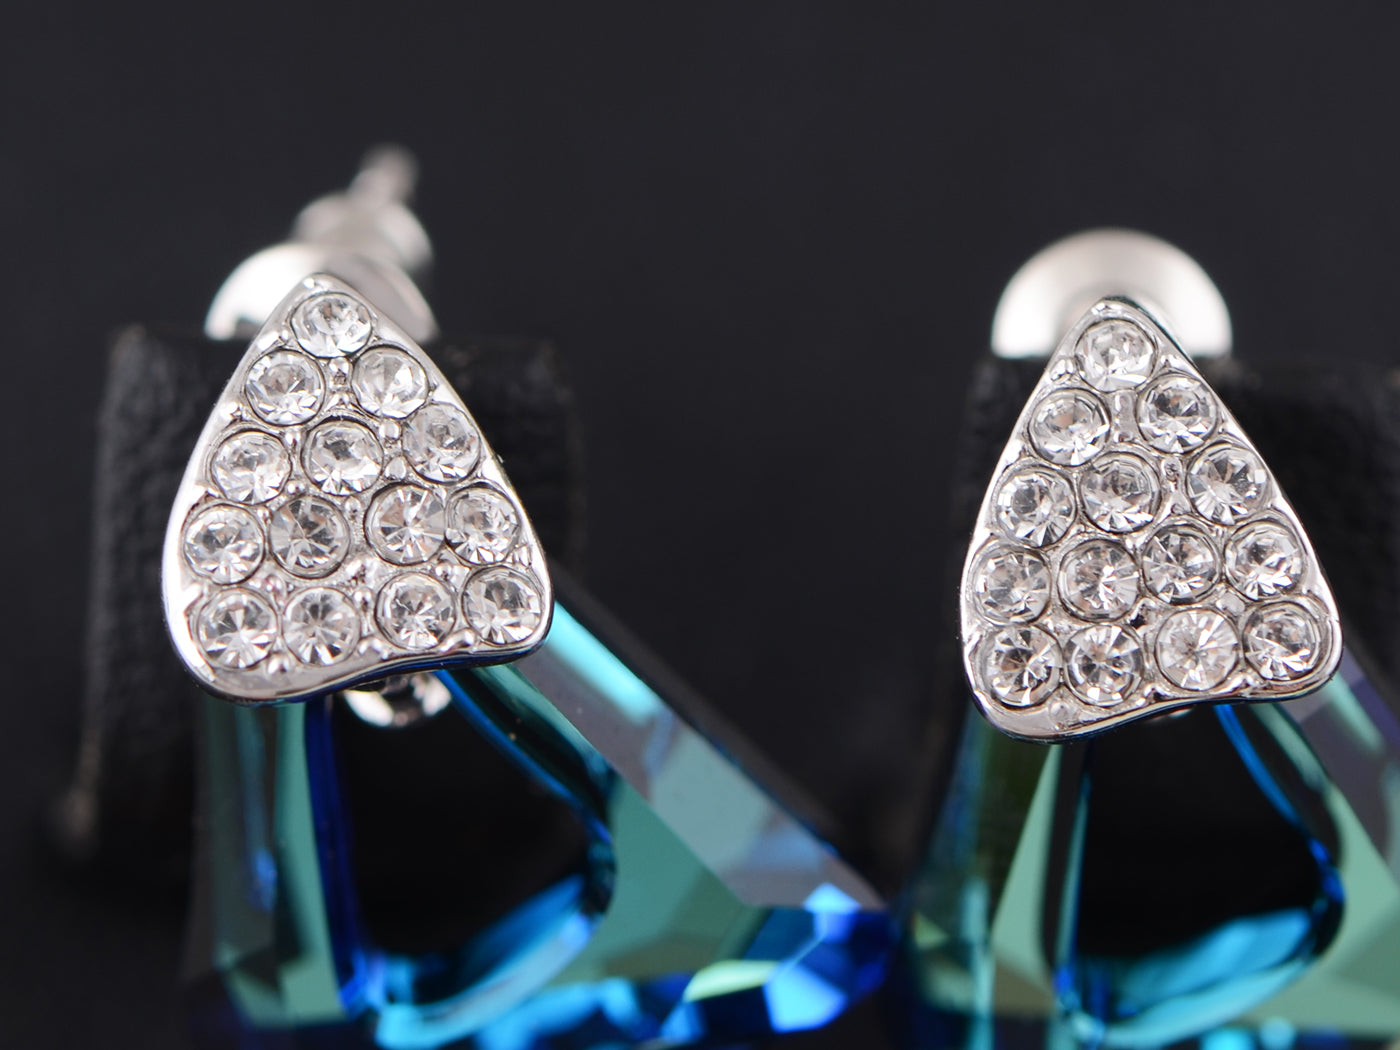 Swarovski Crystal Element Silver Teal Blue Colored Abstract Triangle Art Stud Earrings